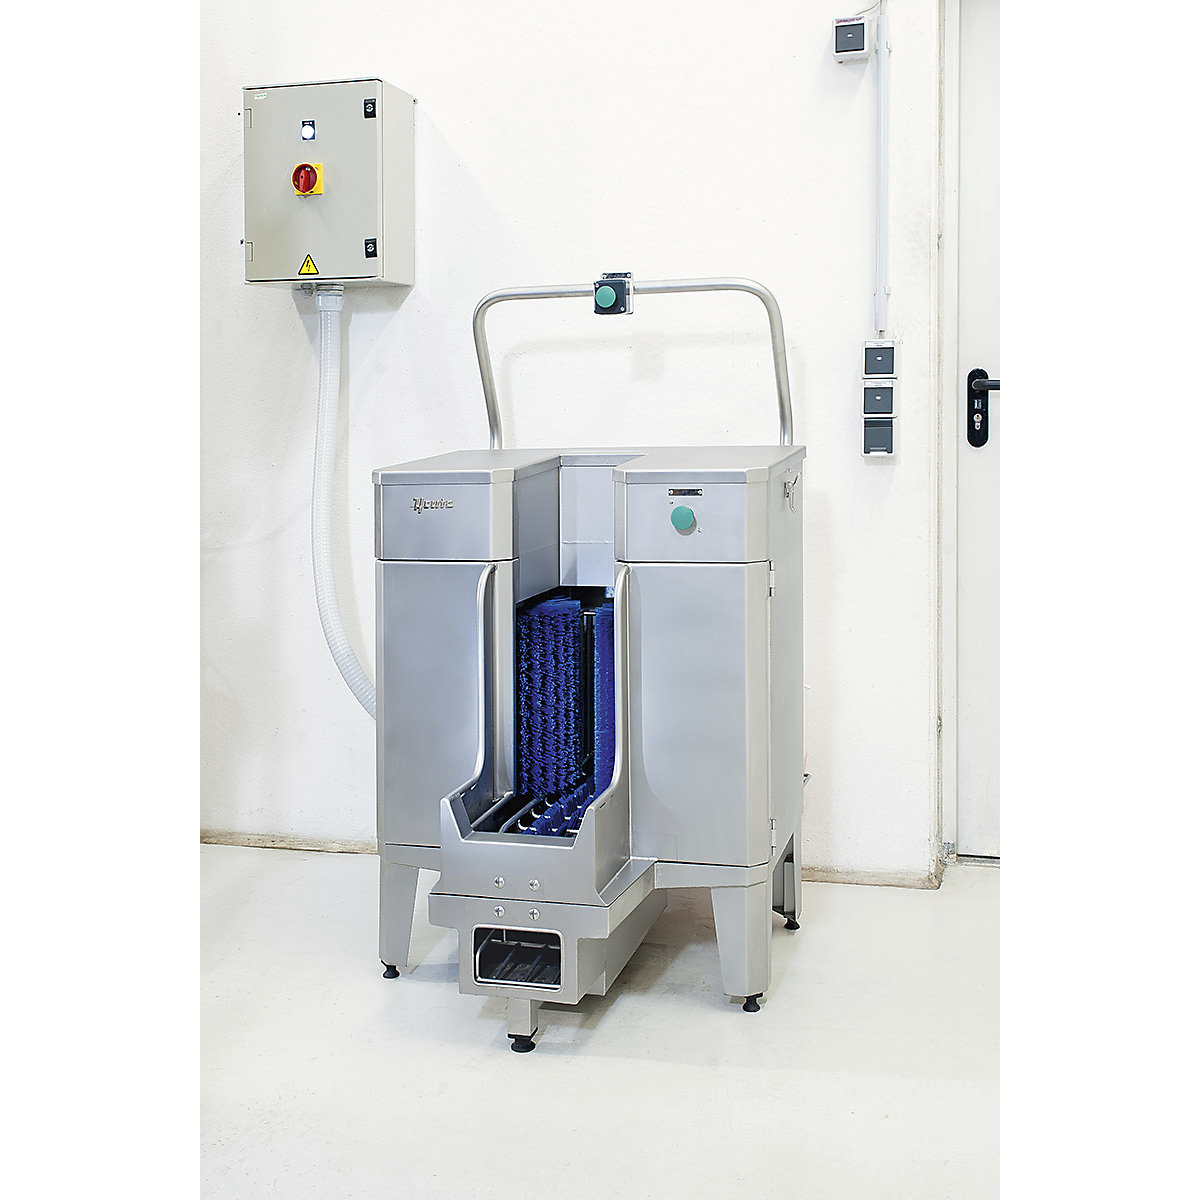 NEPTUN BC1 sole and boot cleaning machine - Heute